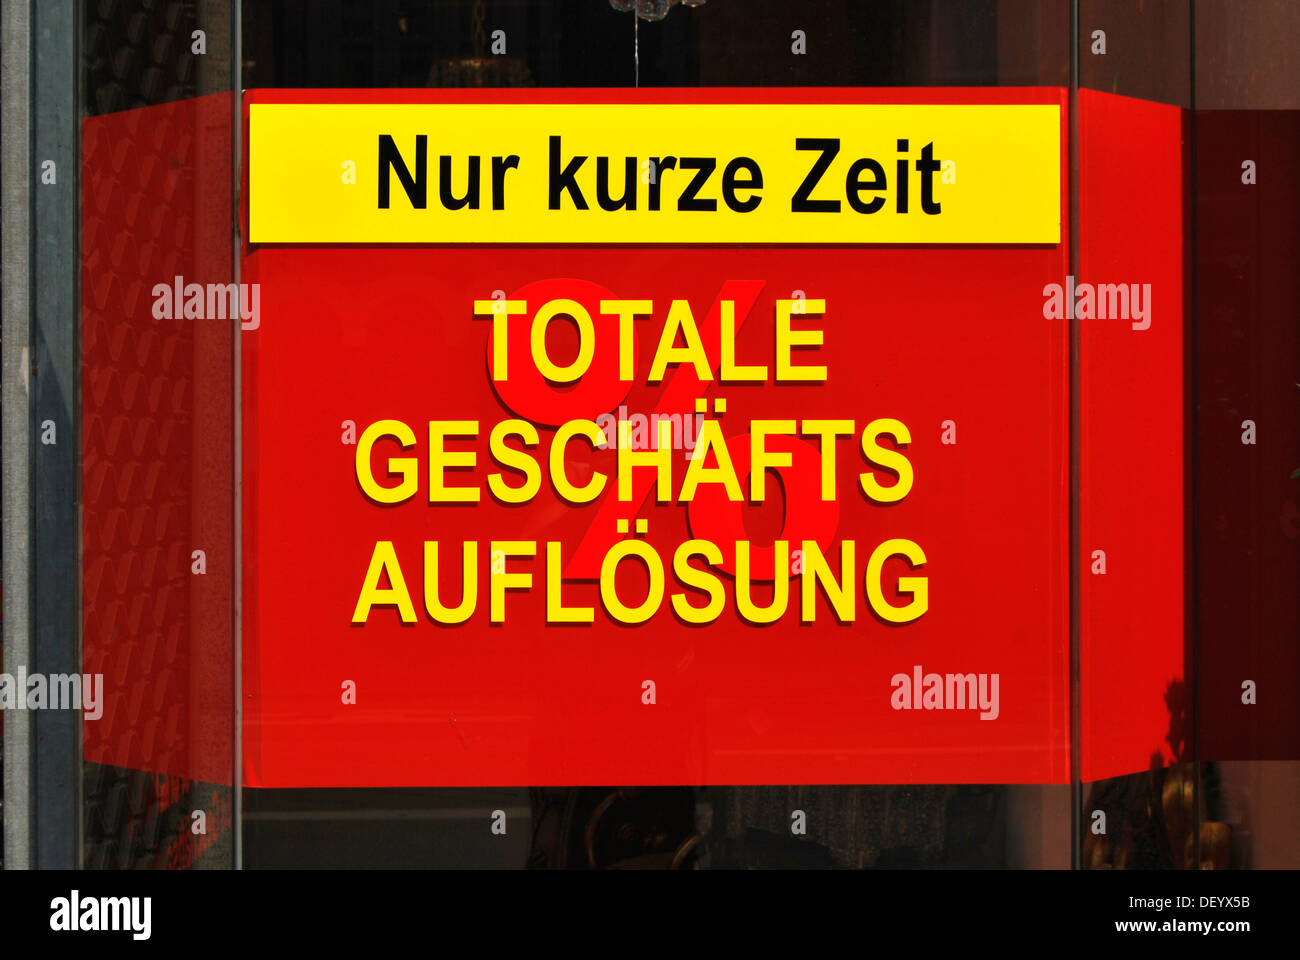 Nur kurze Zeit, Totale Geschaeftsaufloesung or Only a short time, total liquidation, sign, bankruptcy and limited time offers Stock Photo